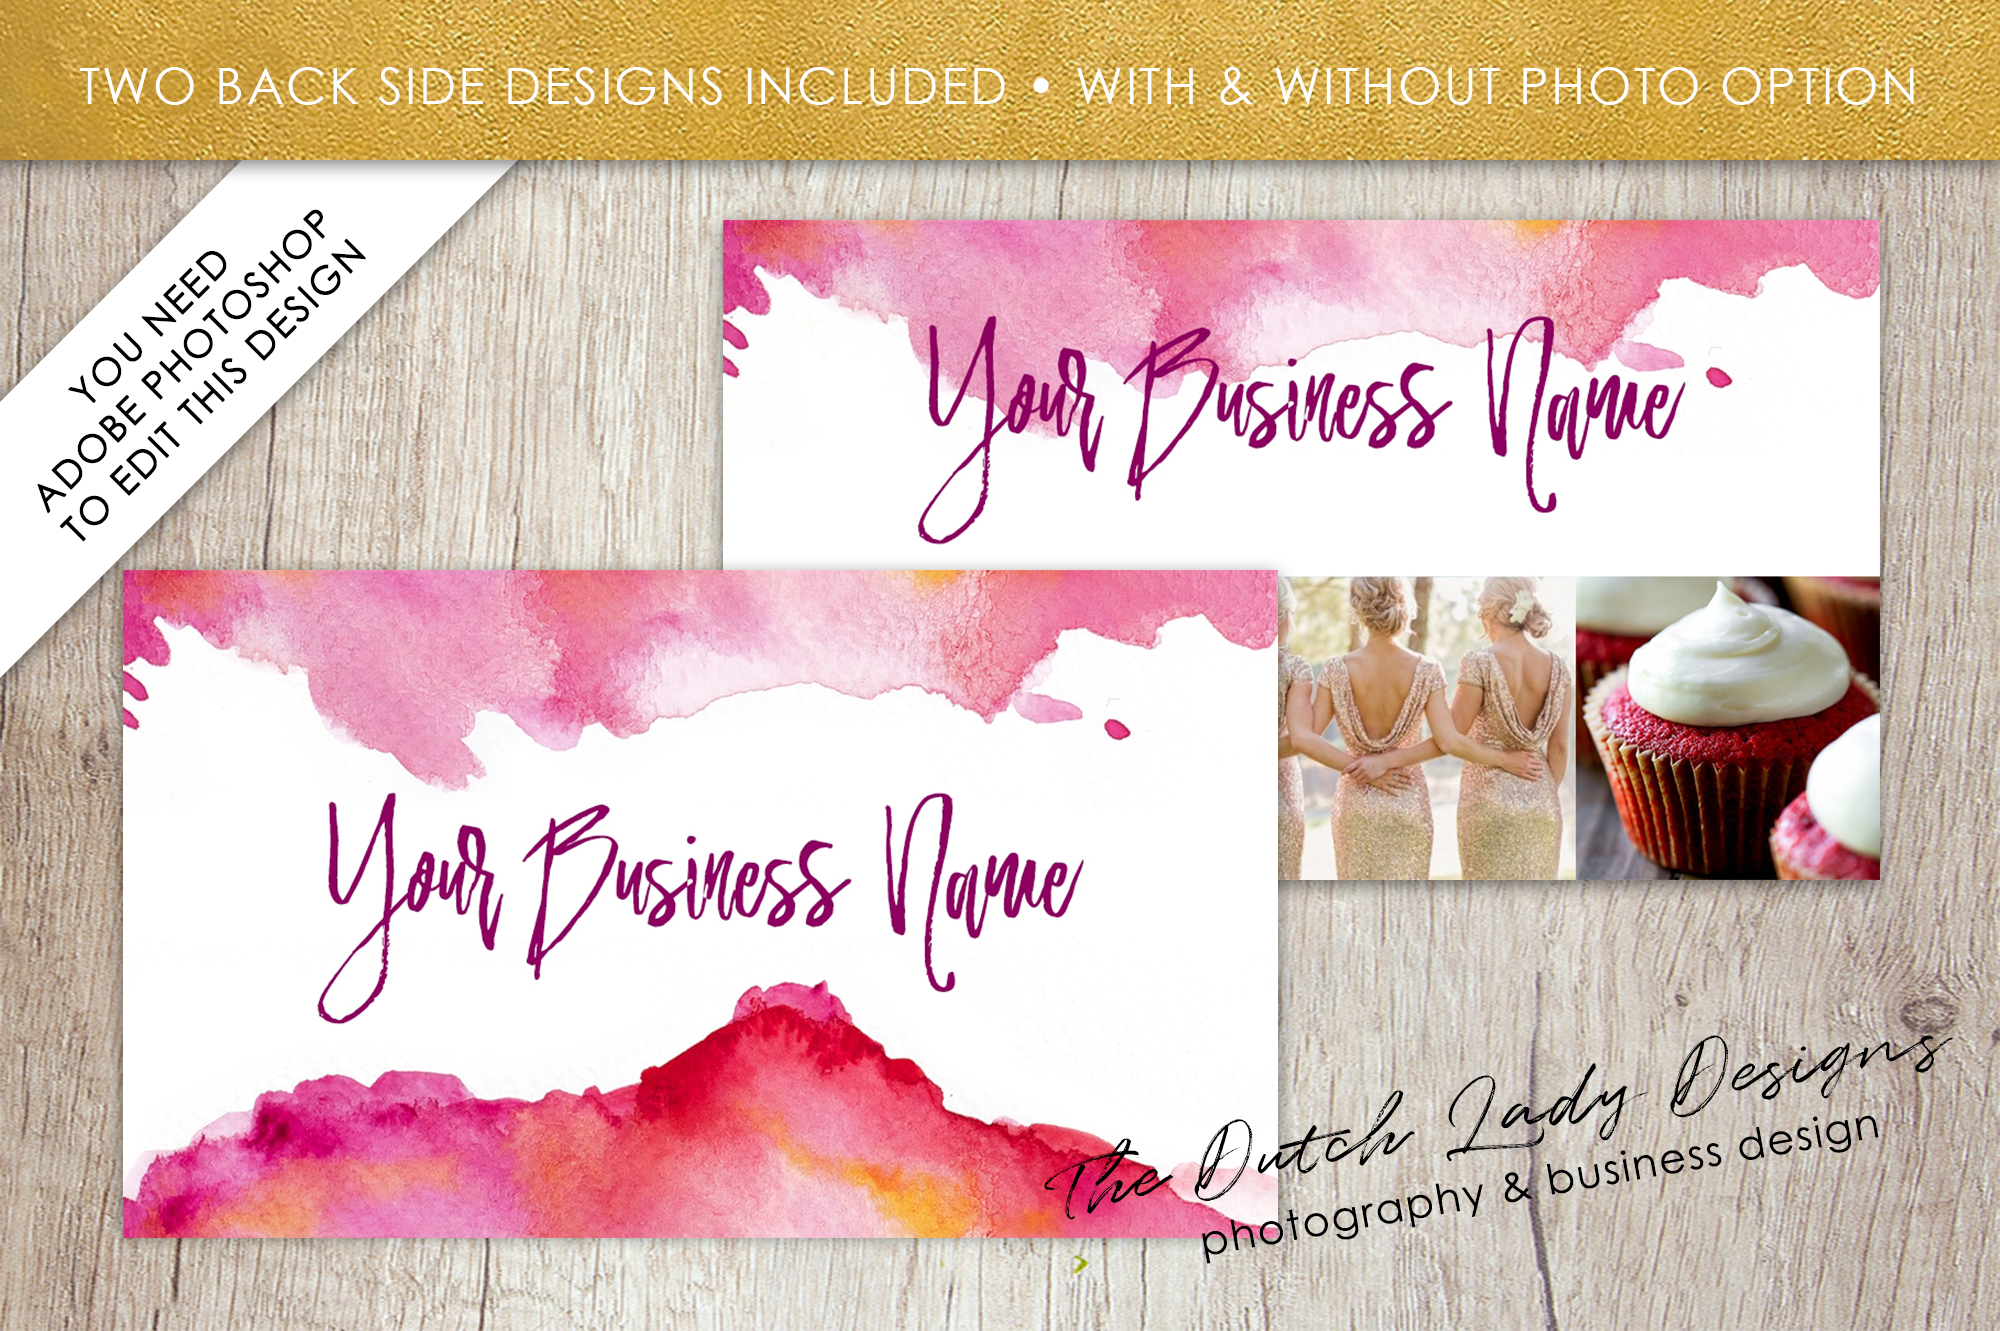 adobe photoshop business card template free download